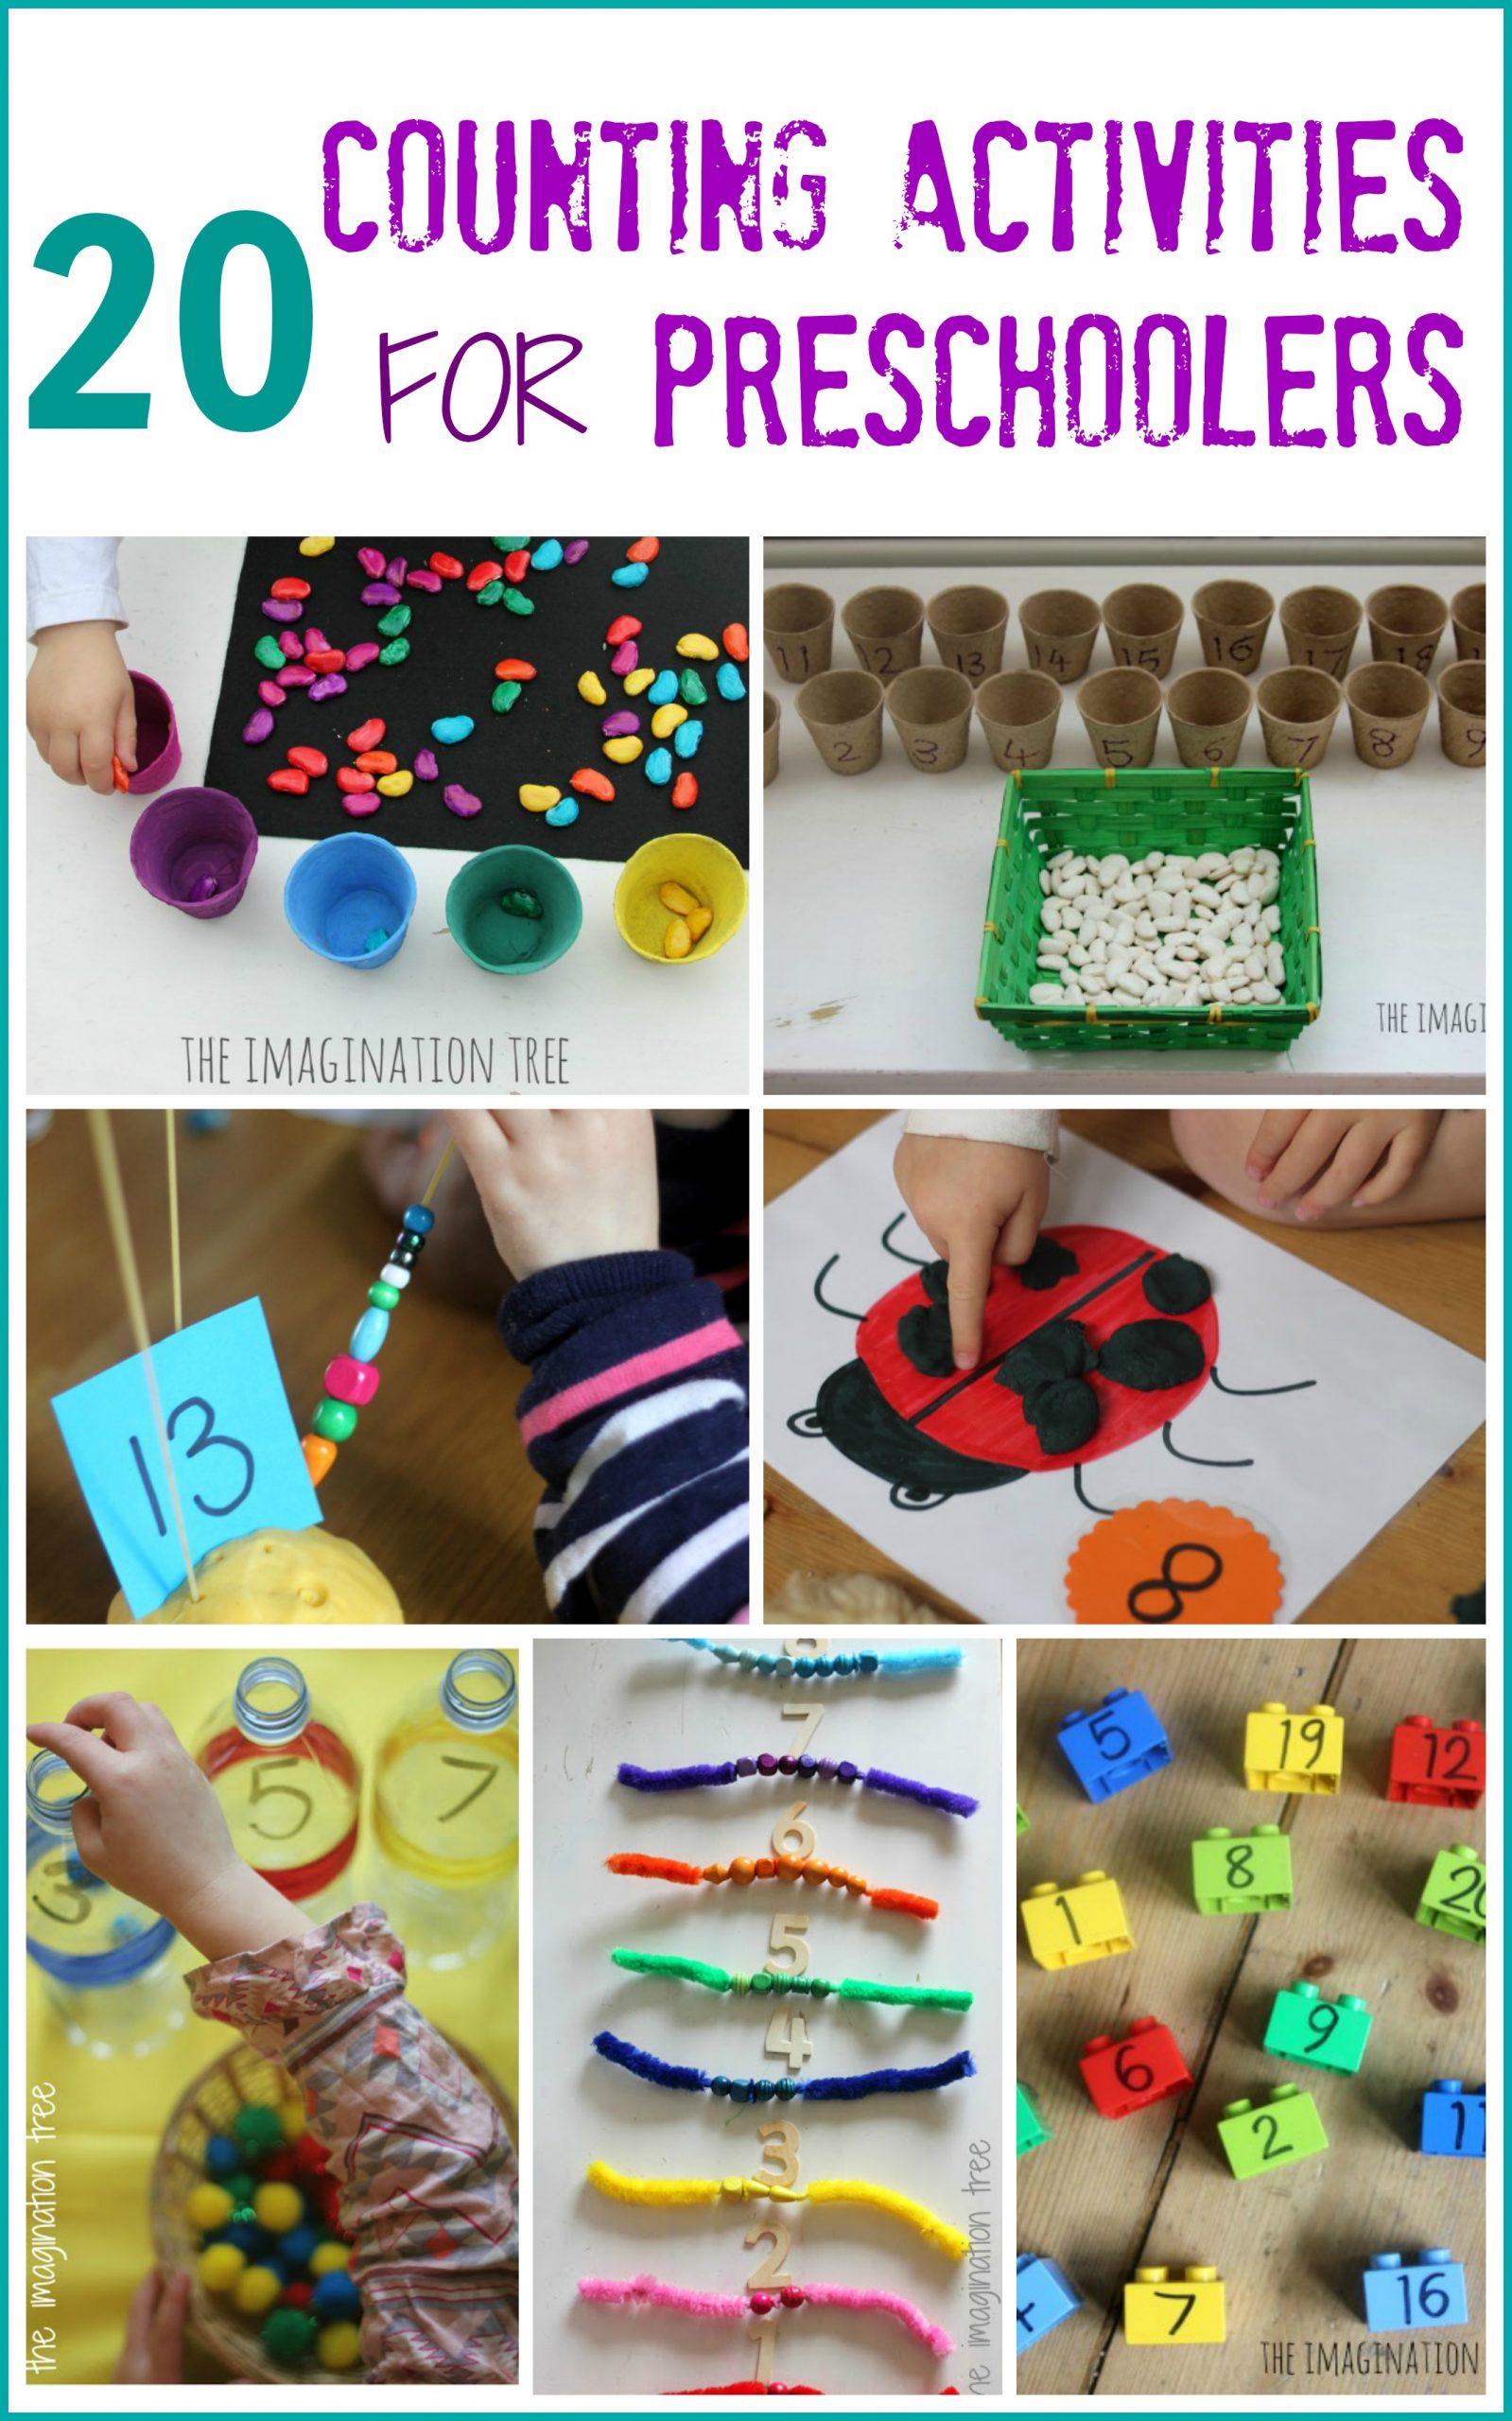 20 Counting Activities For Preschoolers - The Imagination Tree